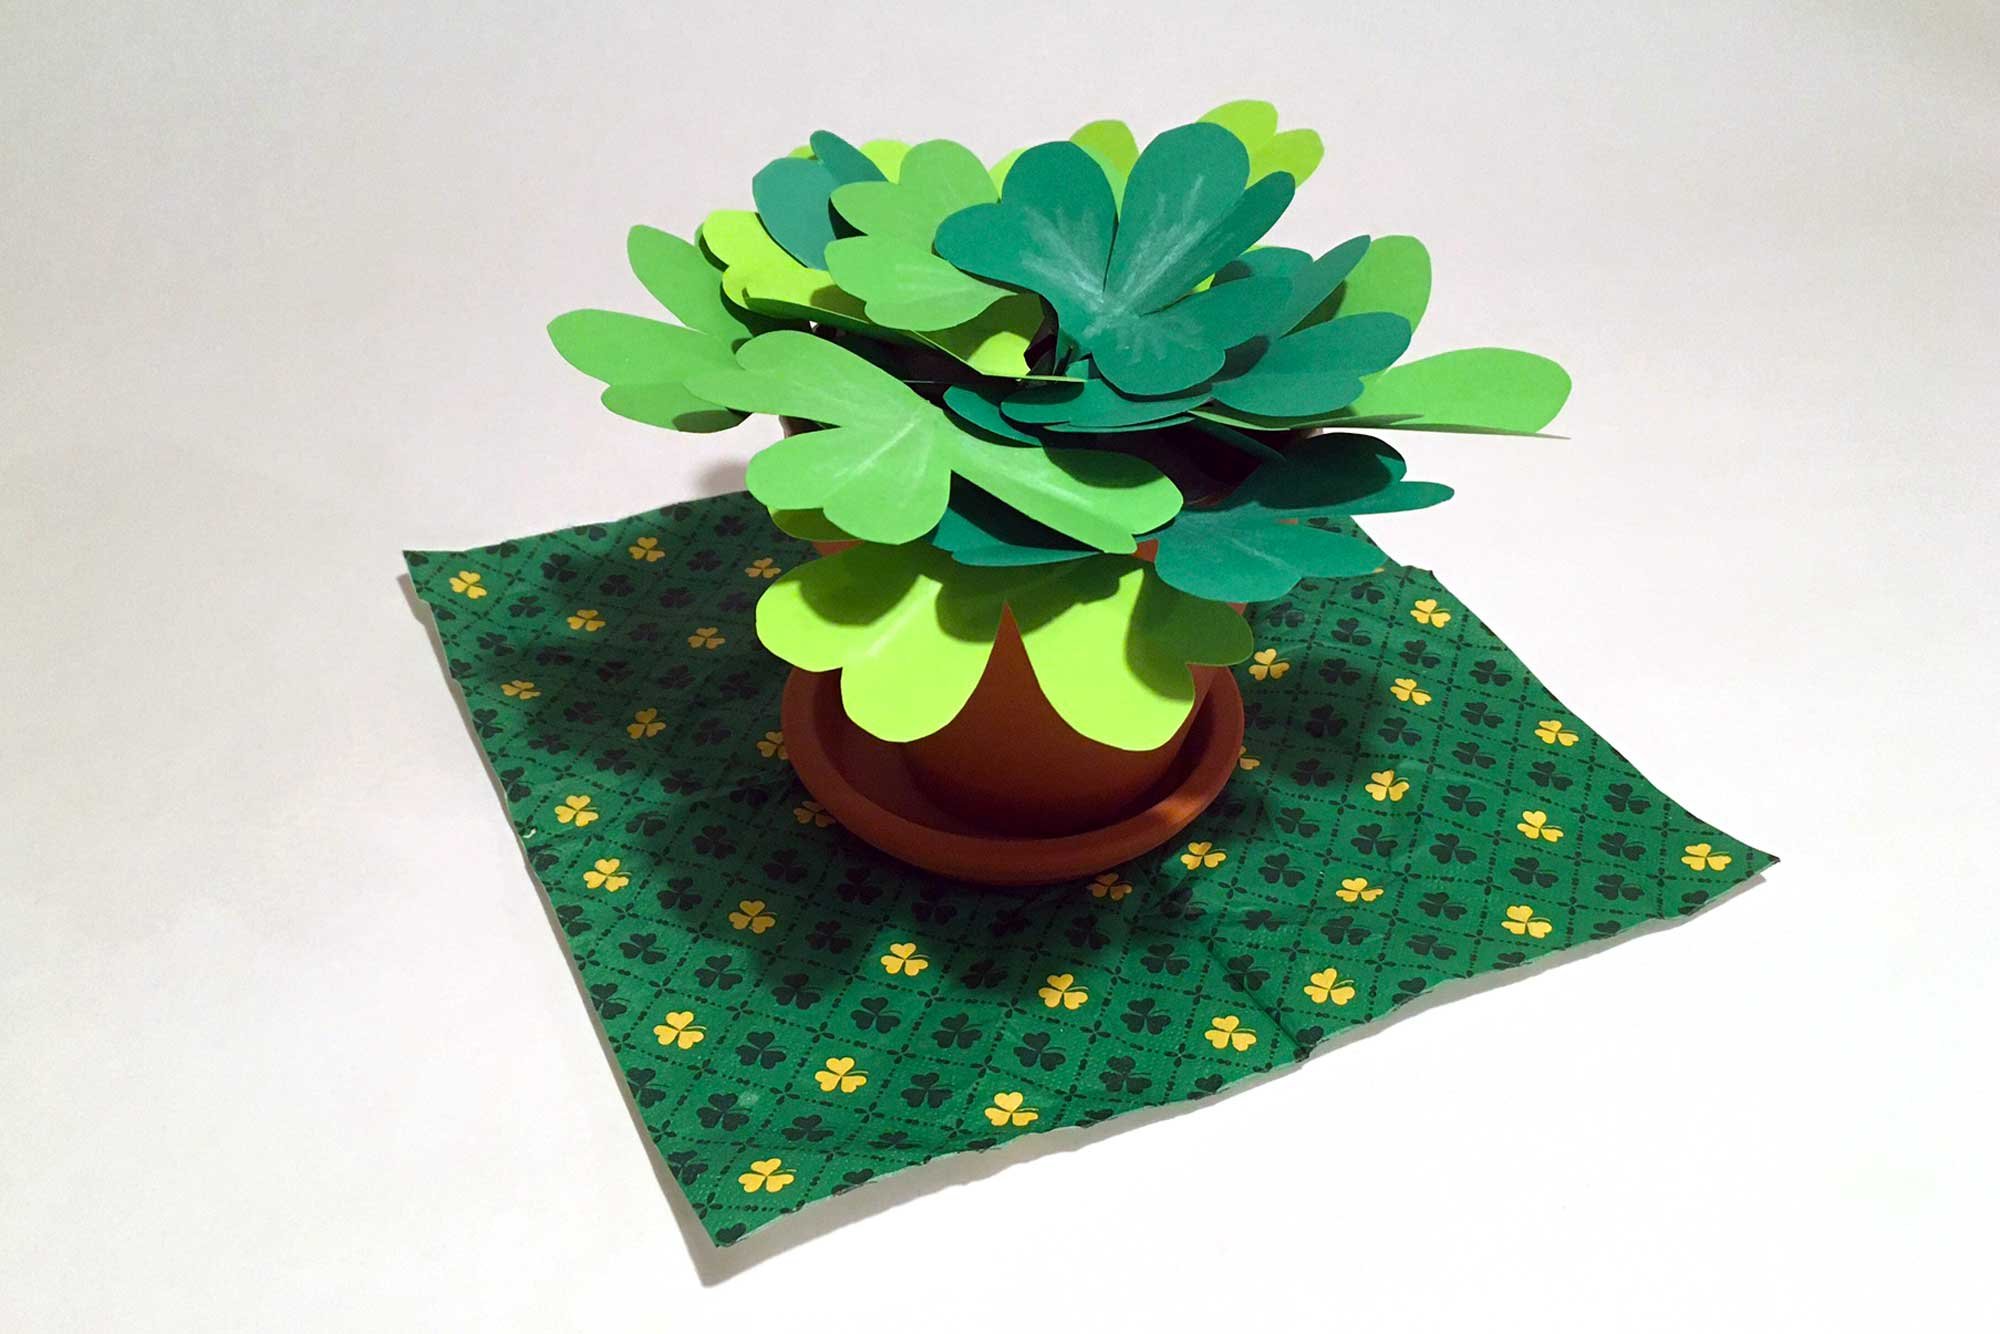 How to Make an Inexpensive Centerpiece of Paper Shamrocks